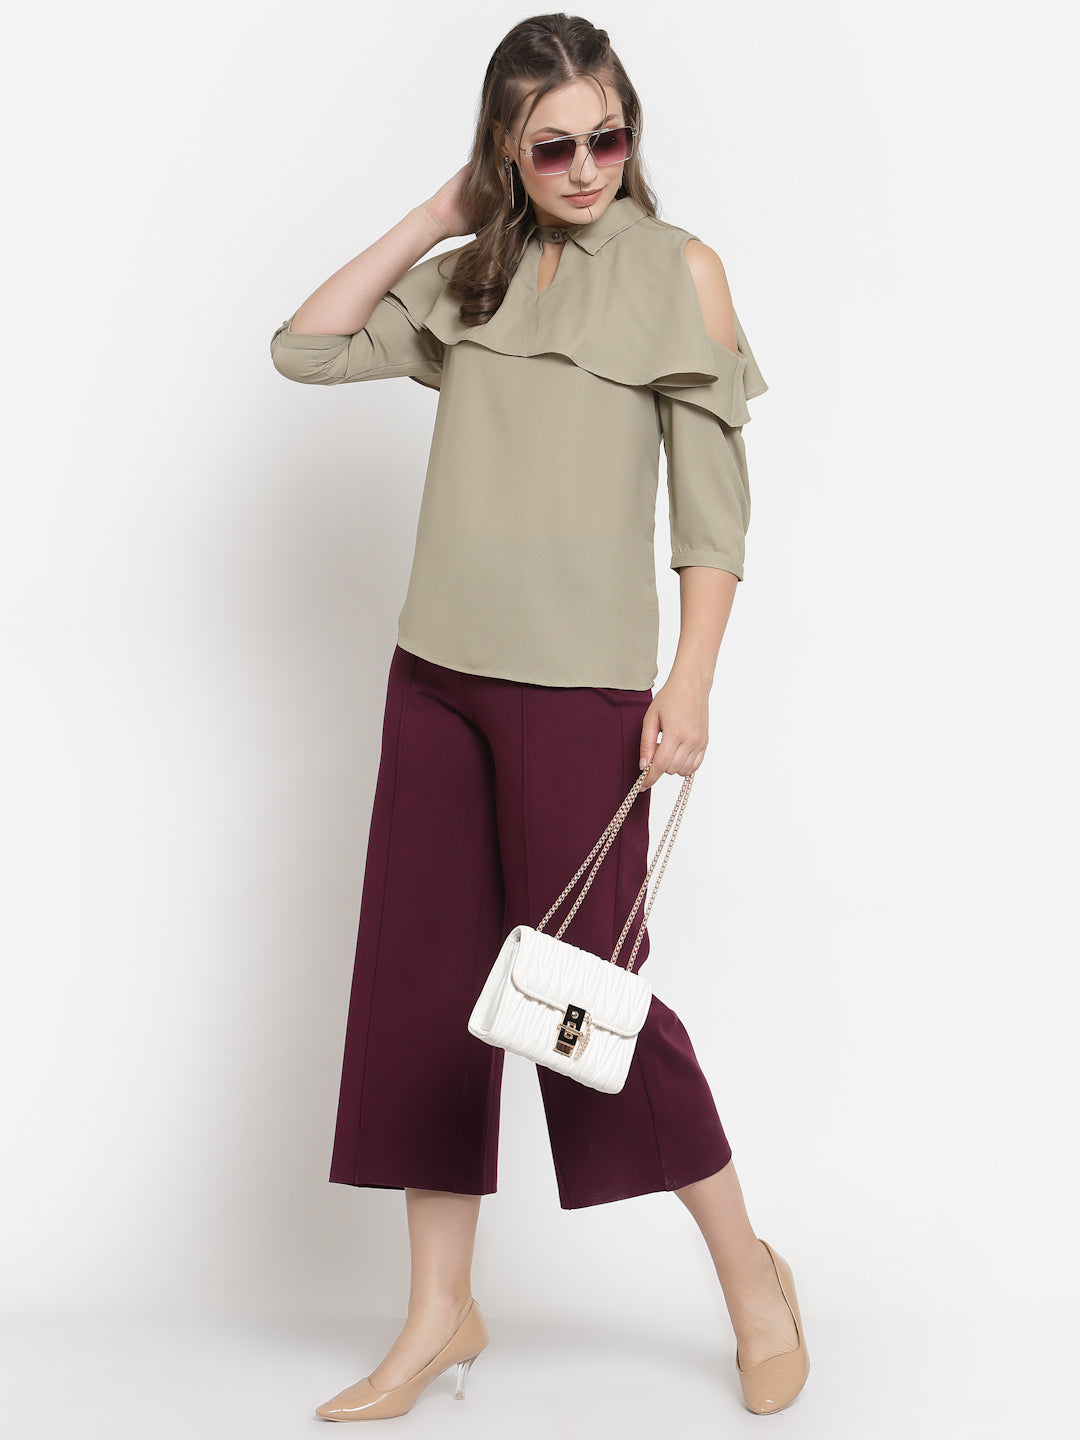 Gipsy Wine Casual NR Knit Culottes